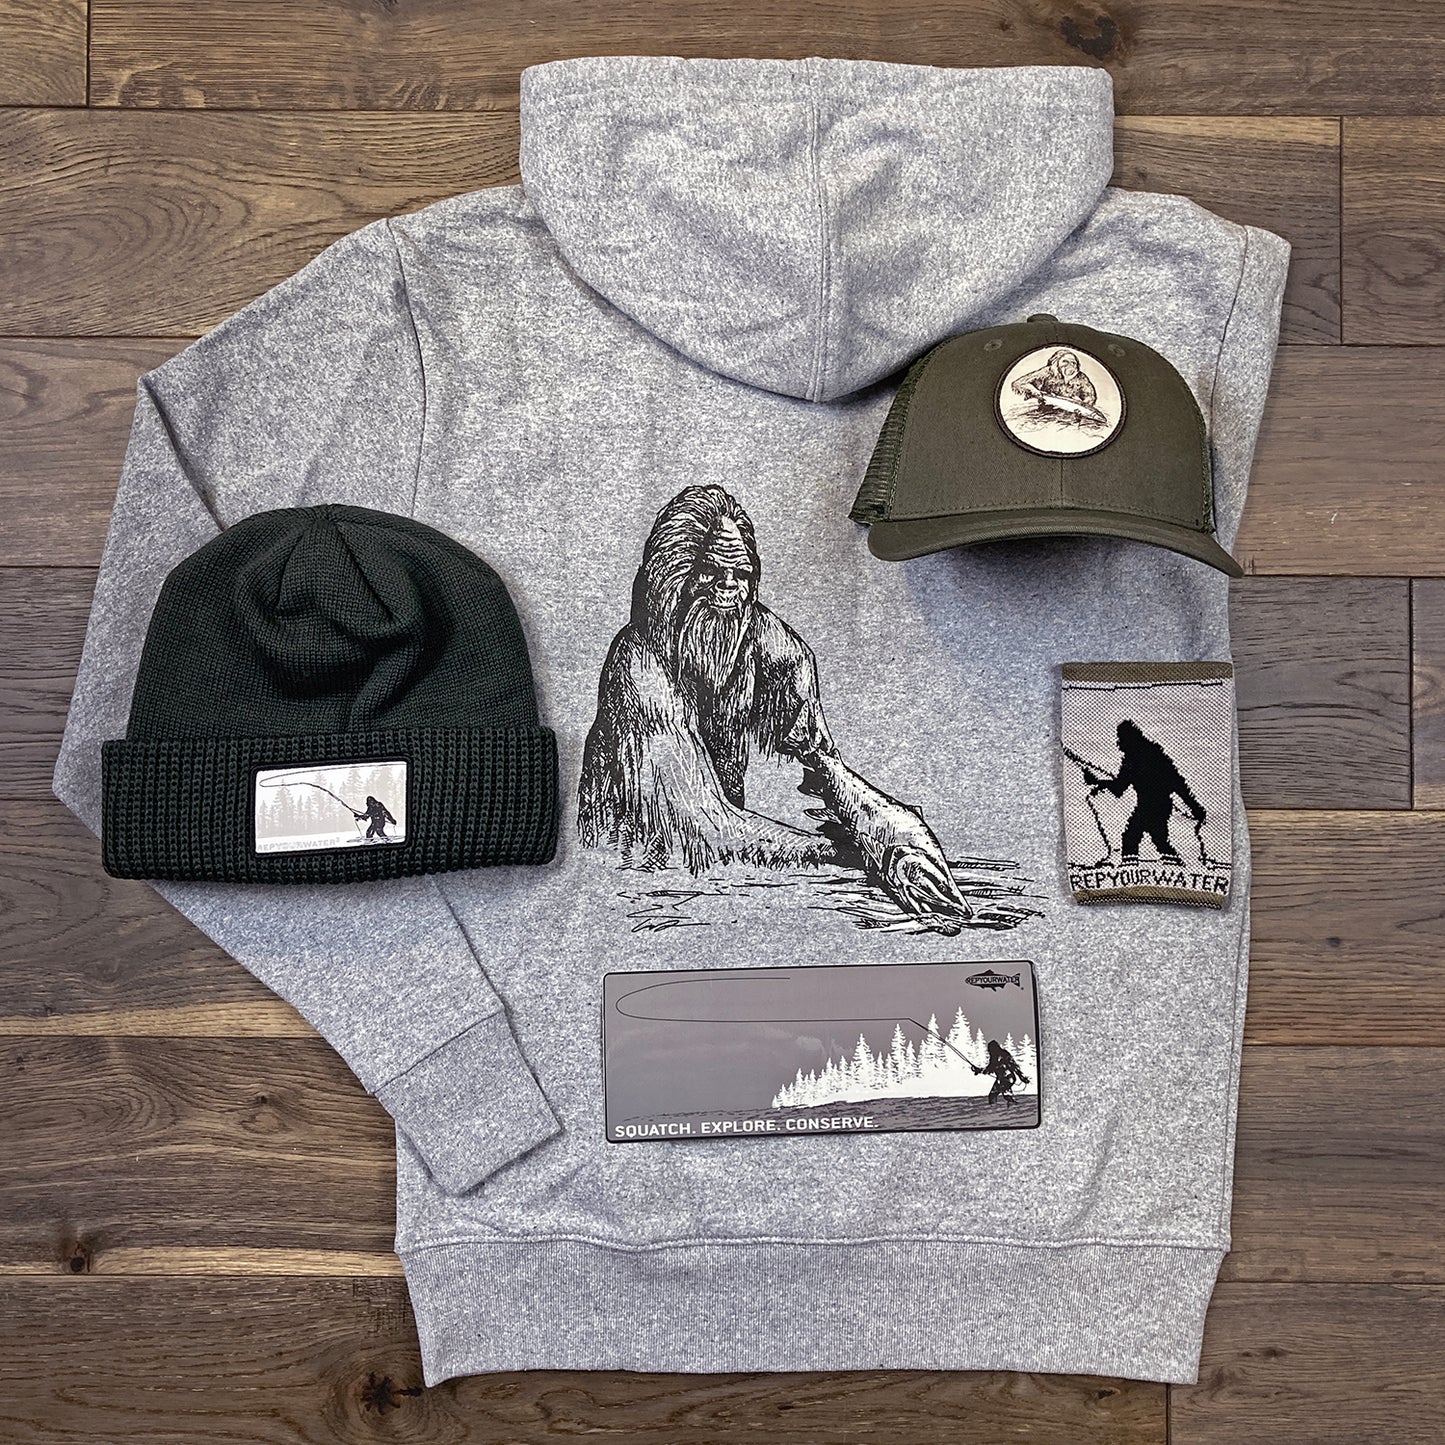 A knit hat, brimmed hat, hooded sweatshirt, can cooler, and sticker laid out on a wood floor.